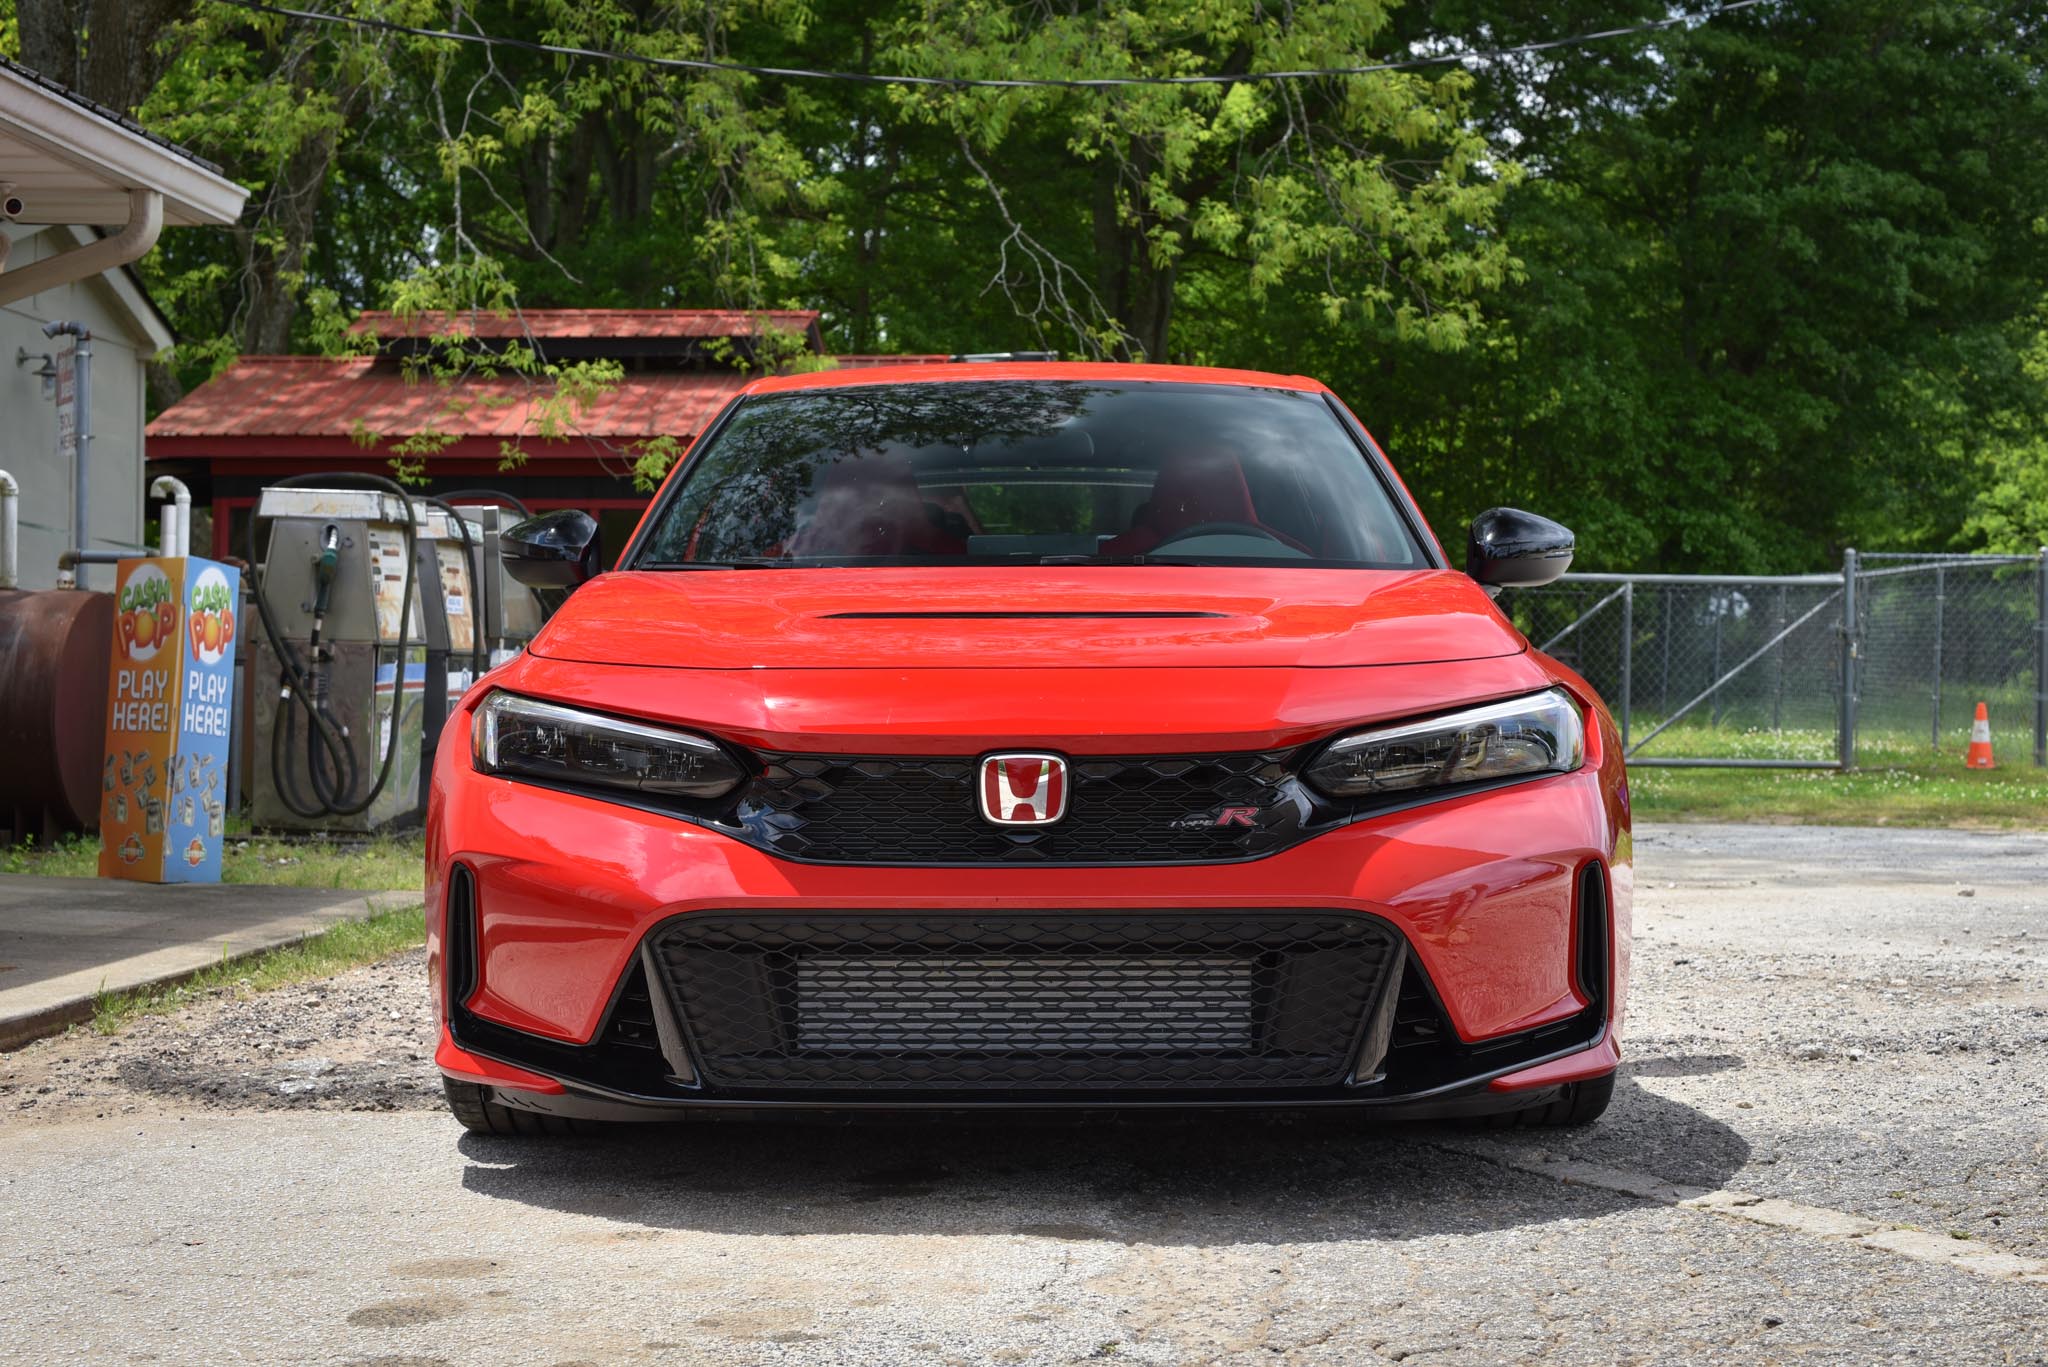 Civic Type-R front